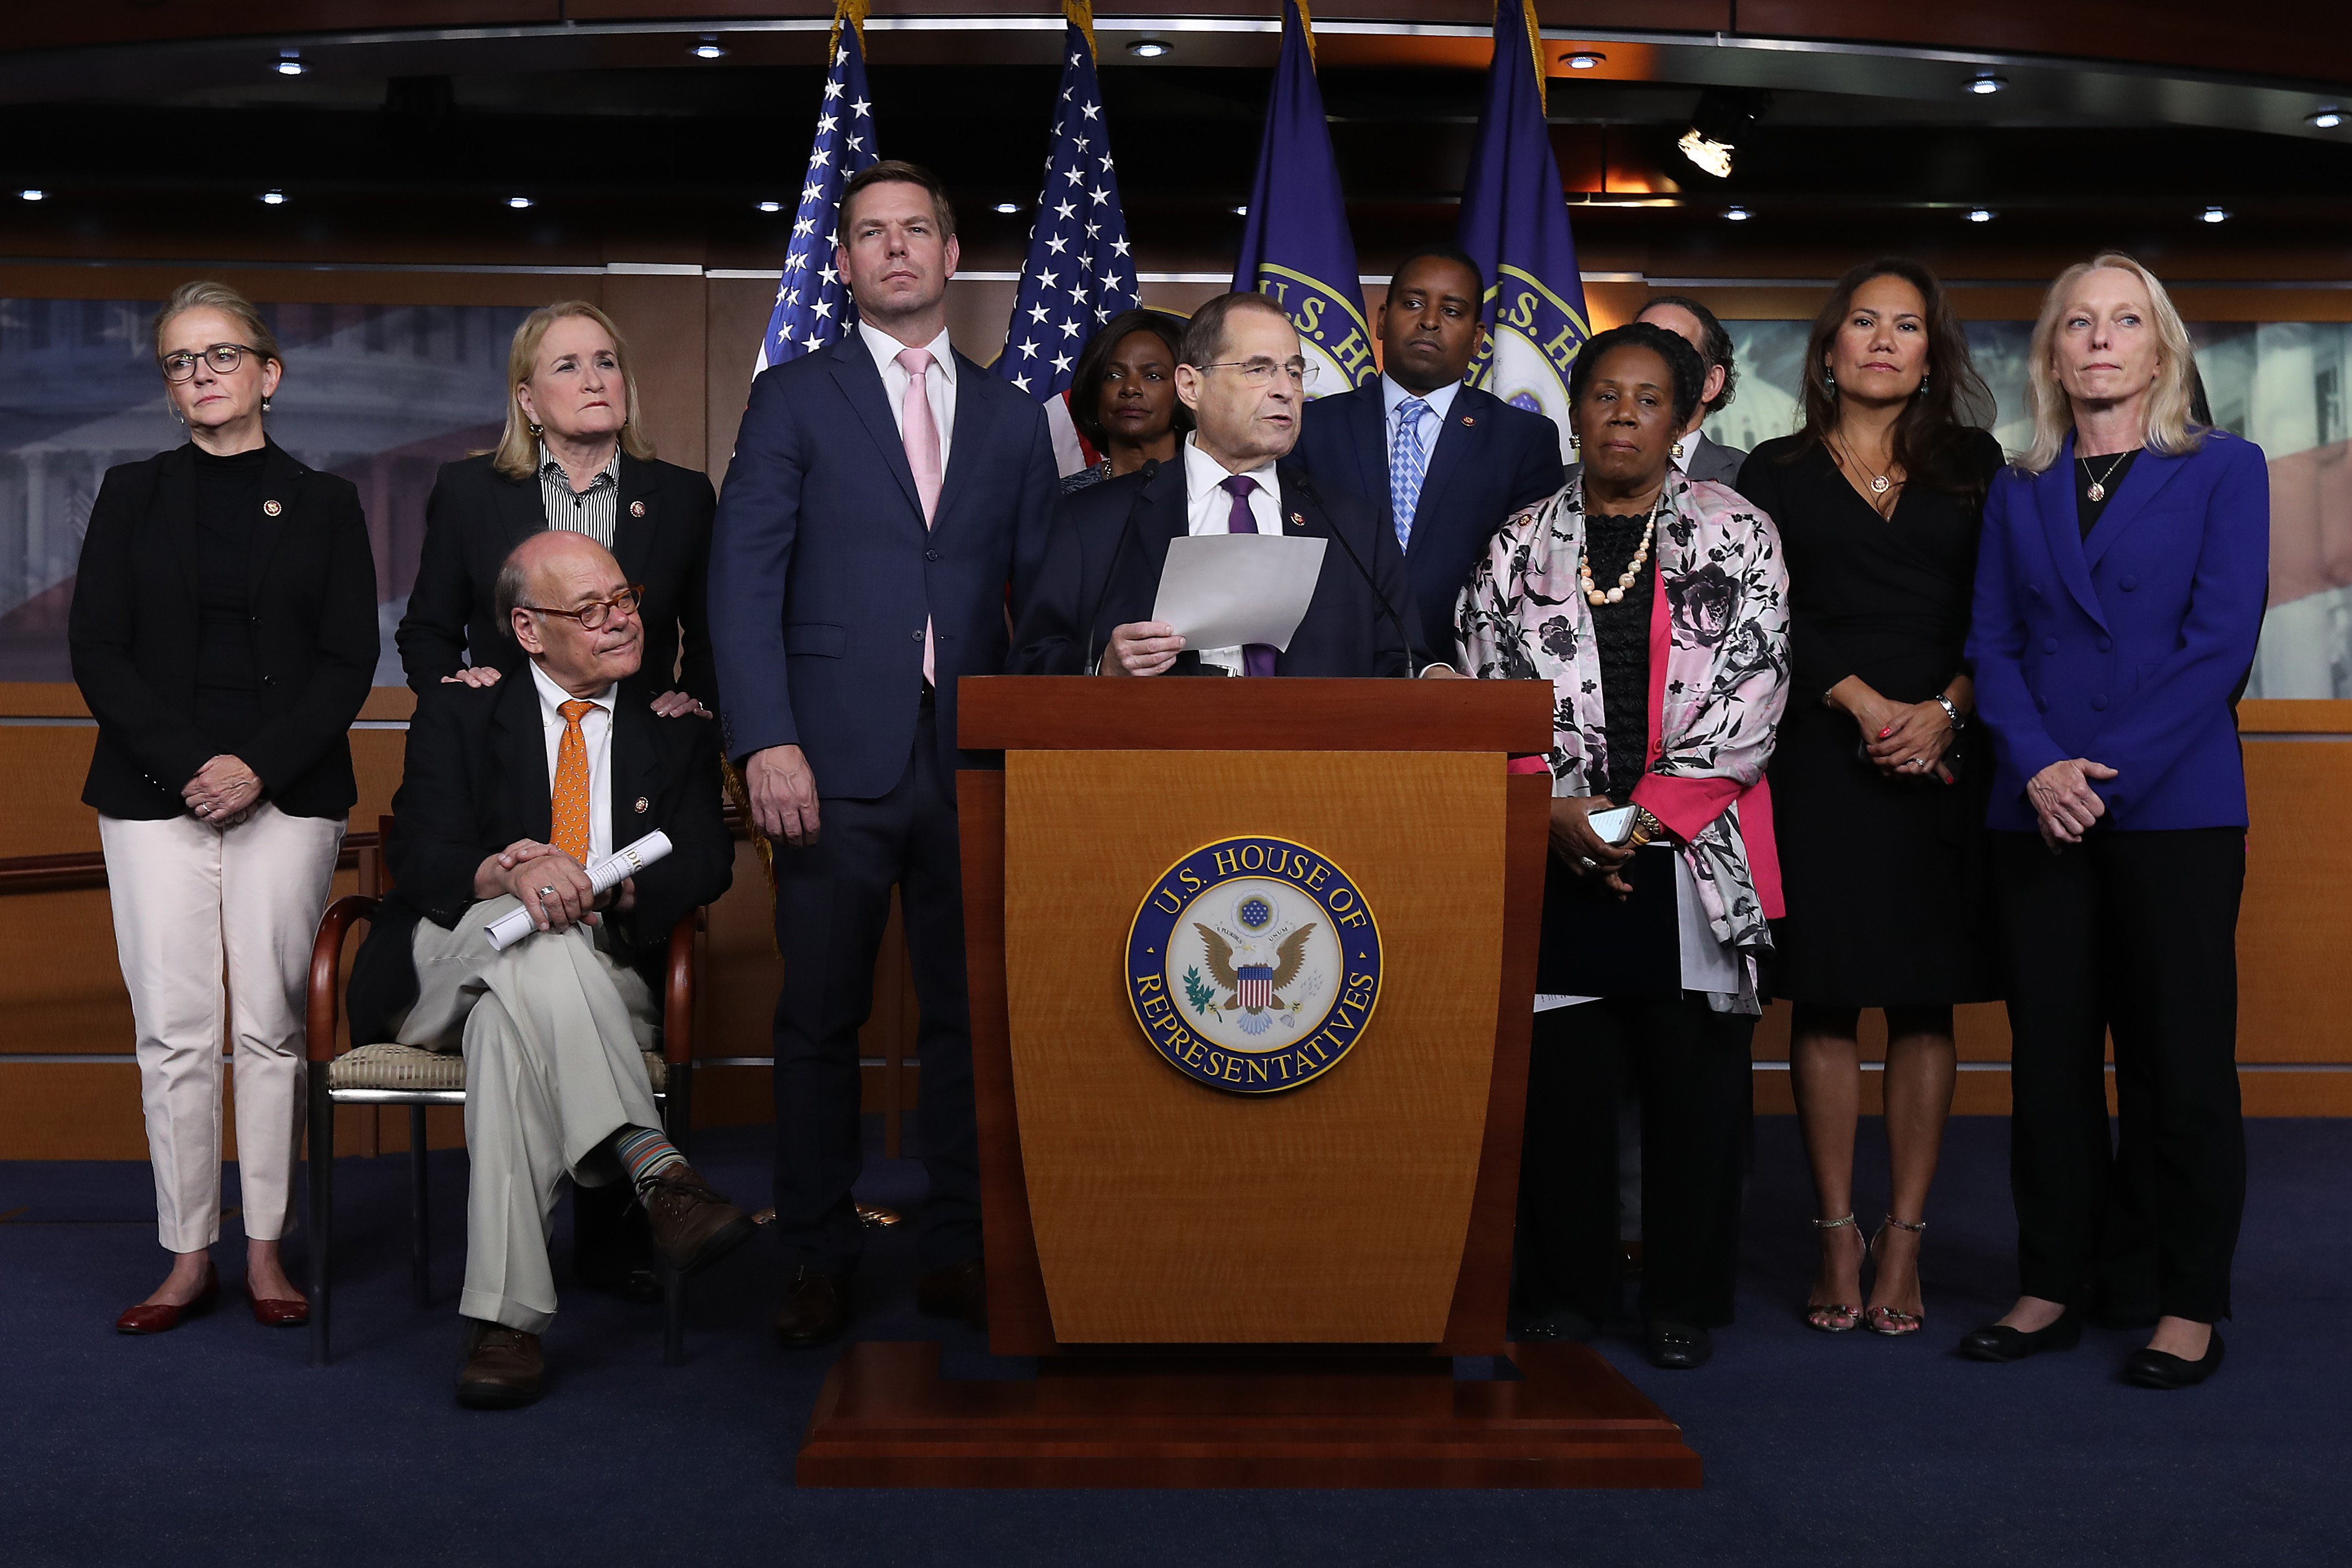 House Judiciary Committee Chairman Jerrold Nadler (D-NY) (C) and fellow Democratic members of the committee speak at the Capitol on July 26, 2019. (Chip Somodevilla/Getty Images)